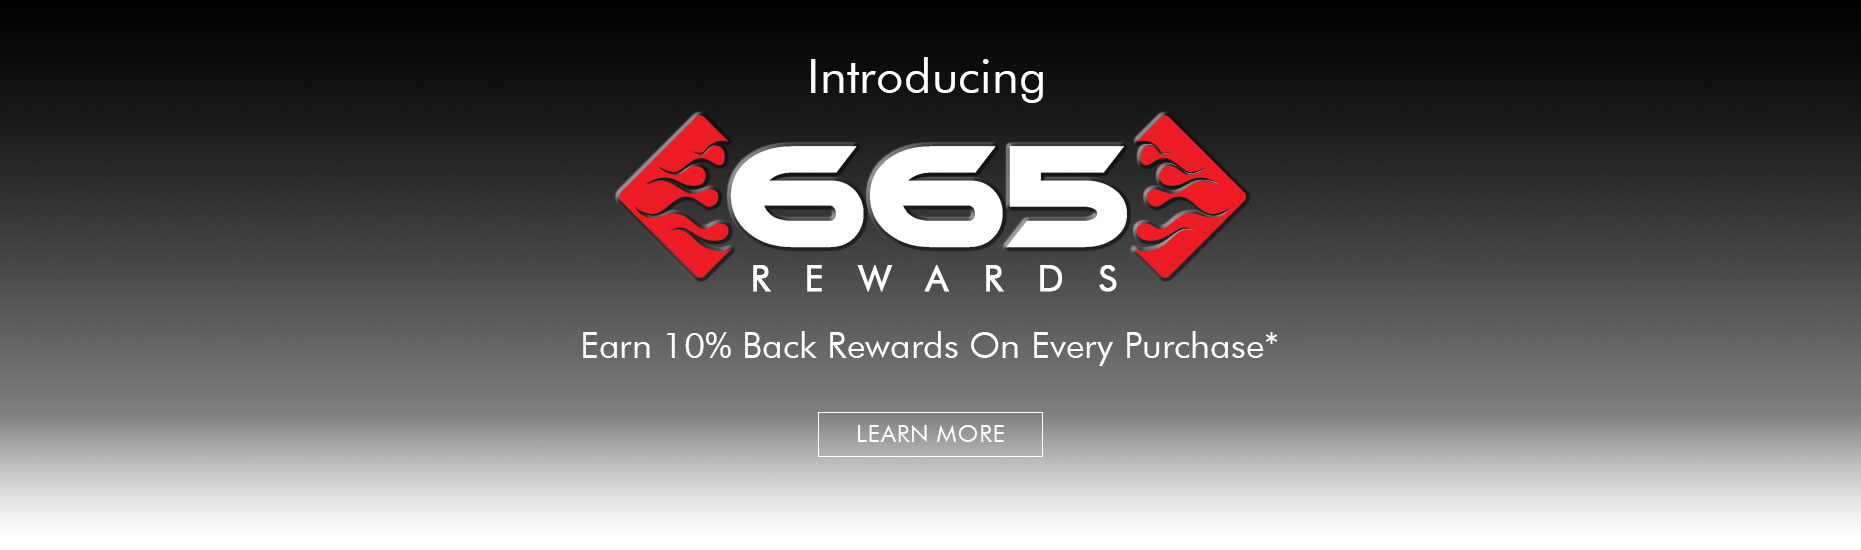 Introducing 665 Rewards Earn 10% Back On Your Purchase